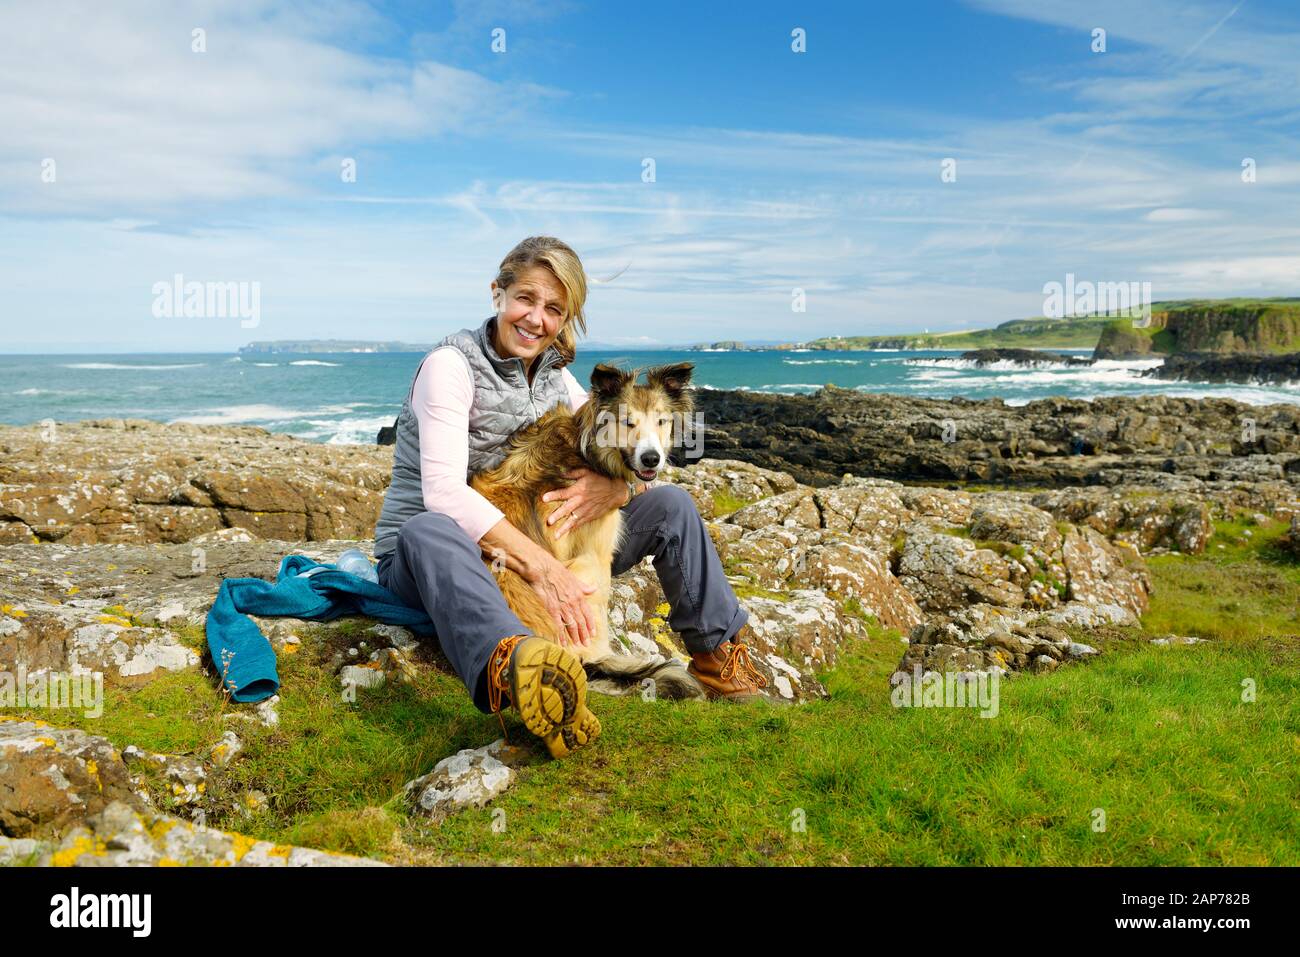 Healthy outdoor middle aged woman summer walking on Ulster Way with border collie dog. Giants Causeway coast at Dunseverick, Co. Antrim, N. Ireland Stock Photo